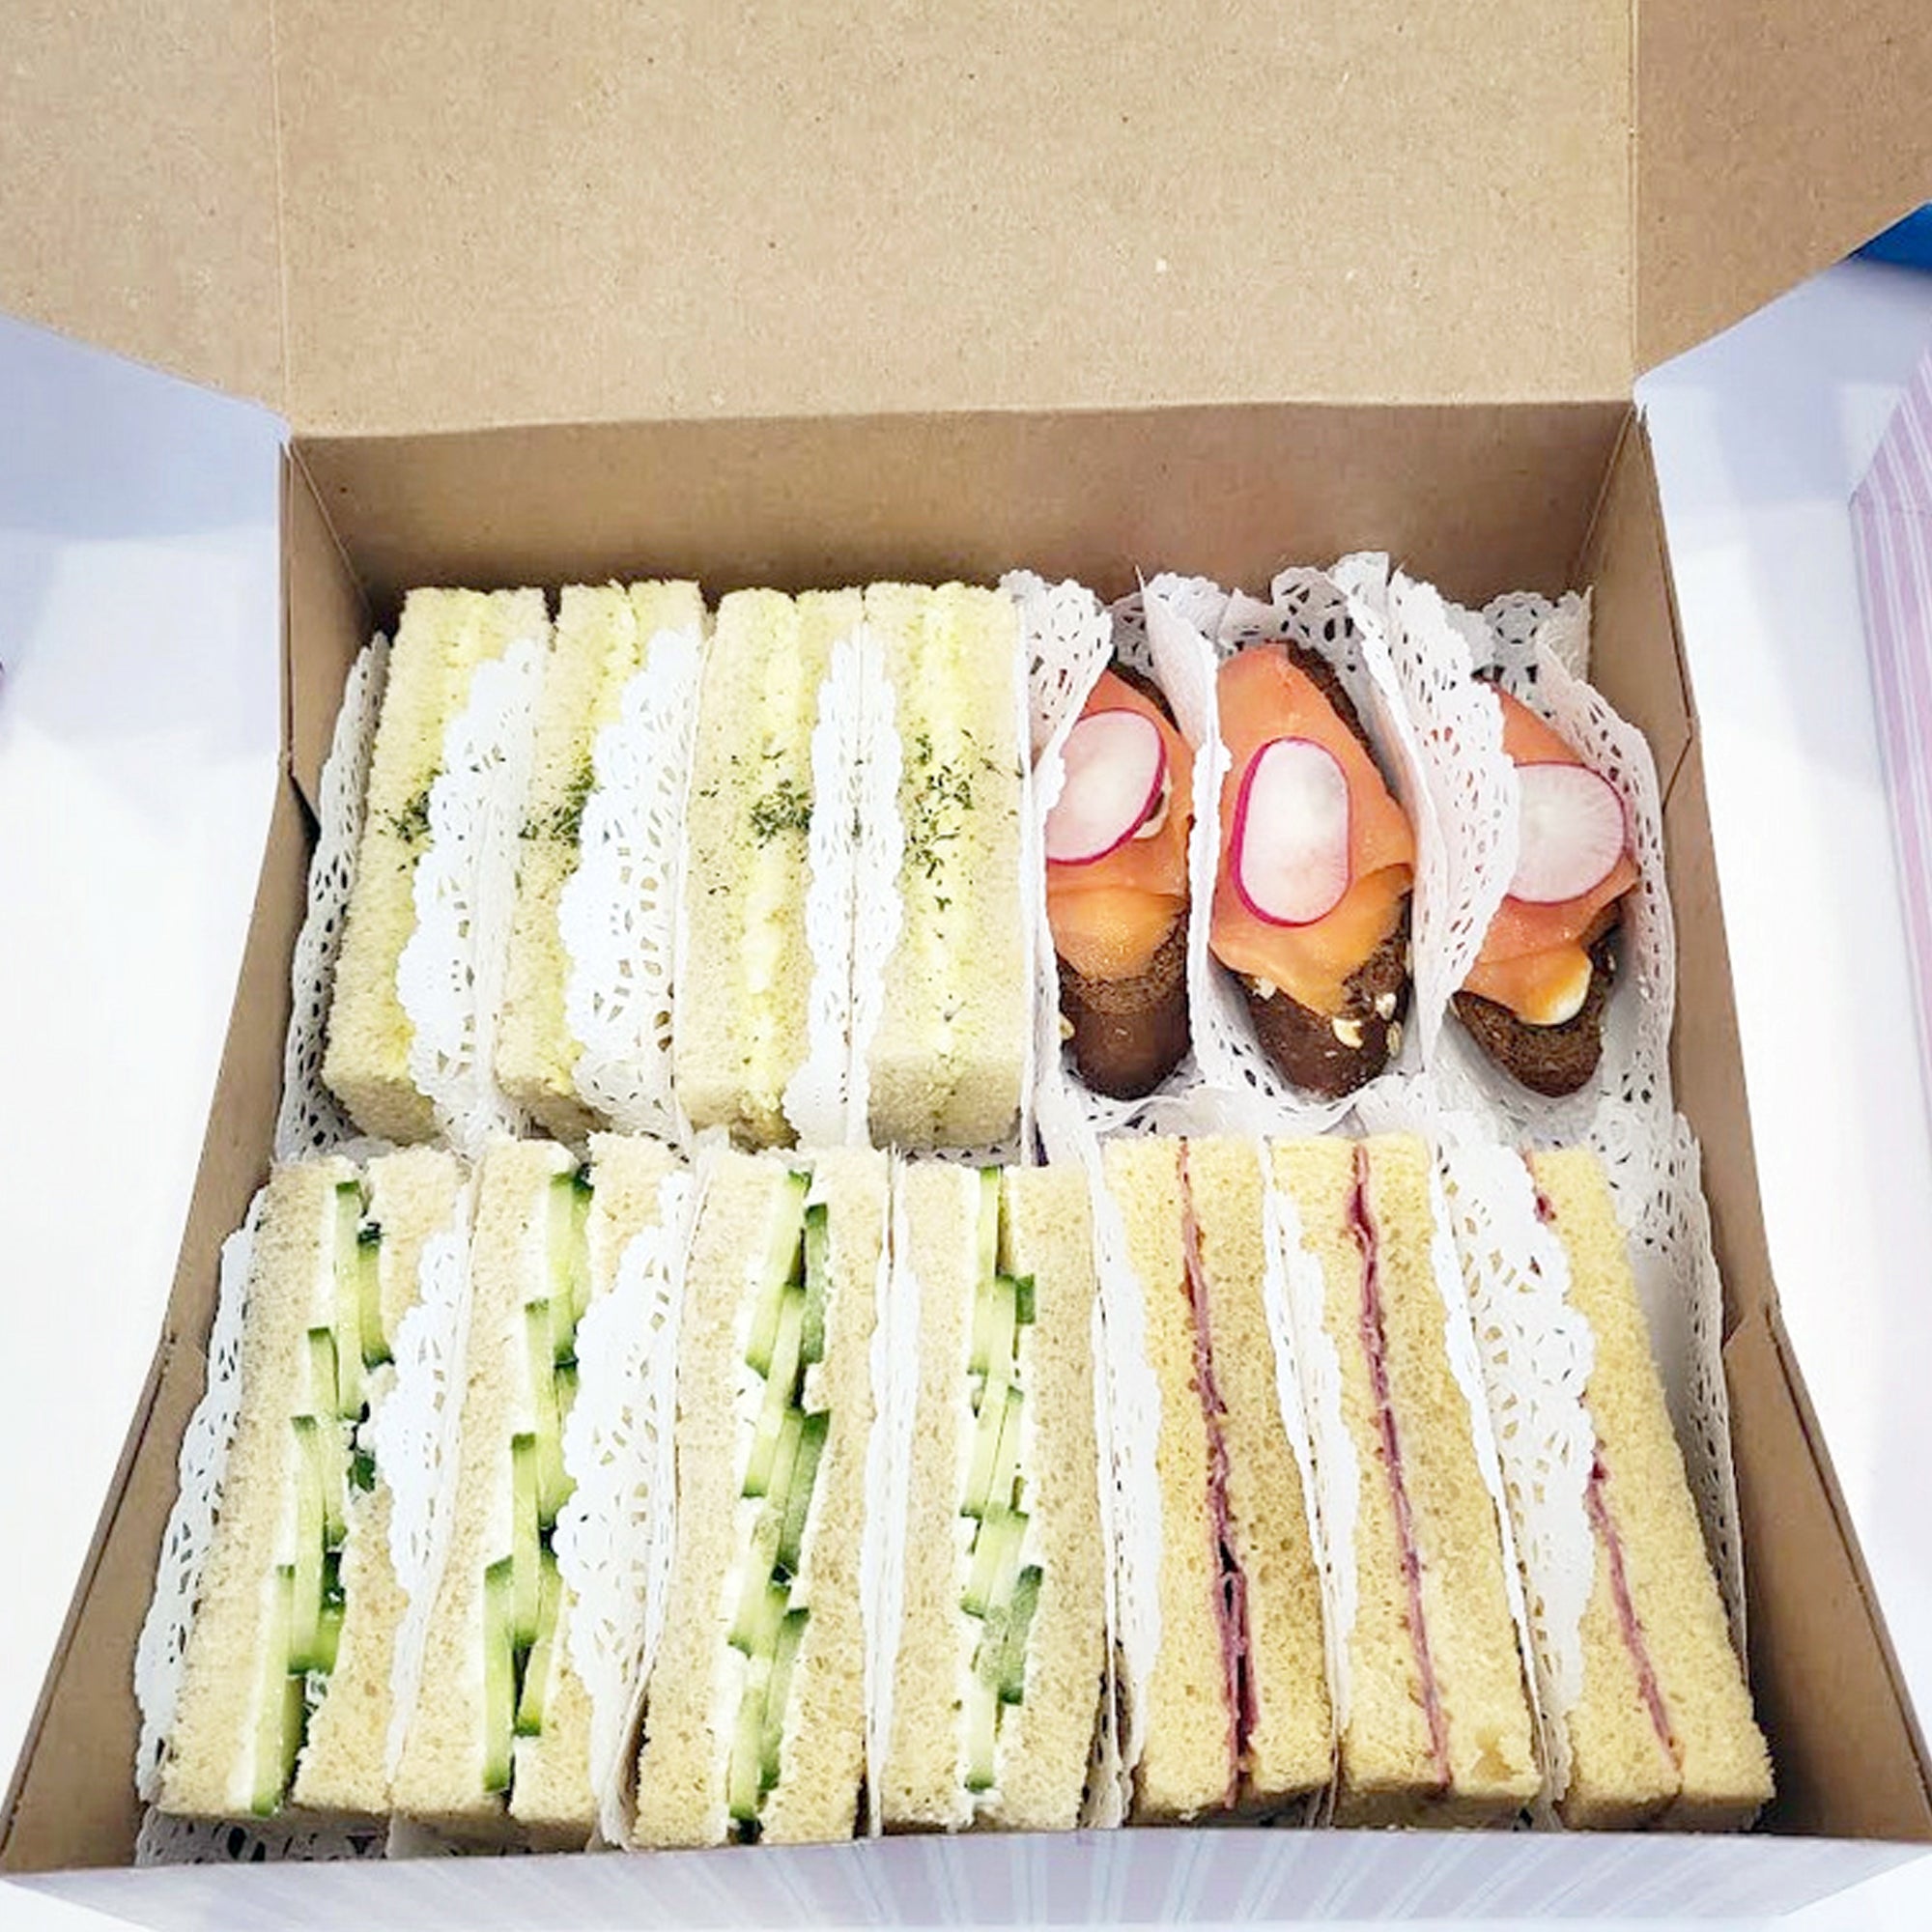 Tea Sandwiches Catering Box (Pick up or Delivery)